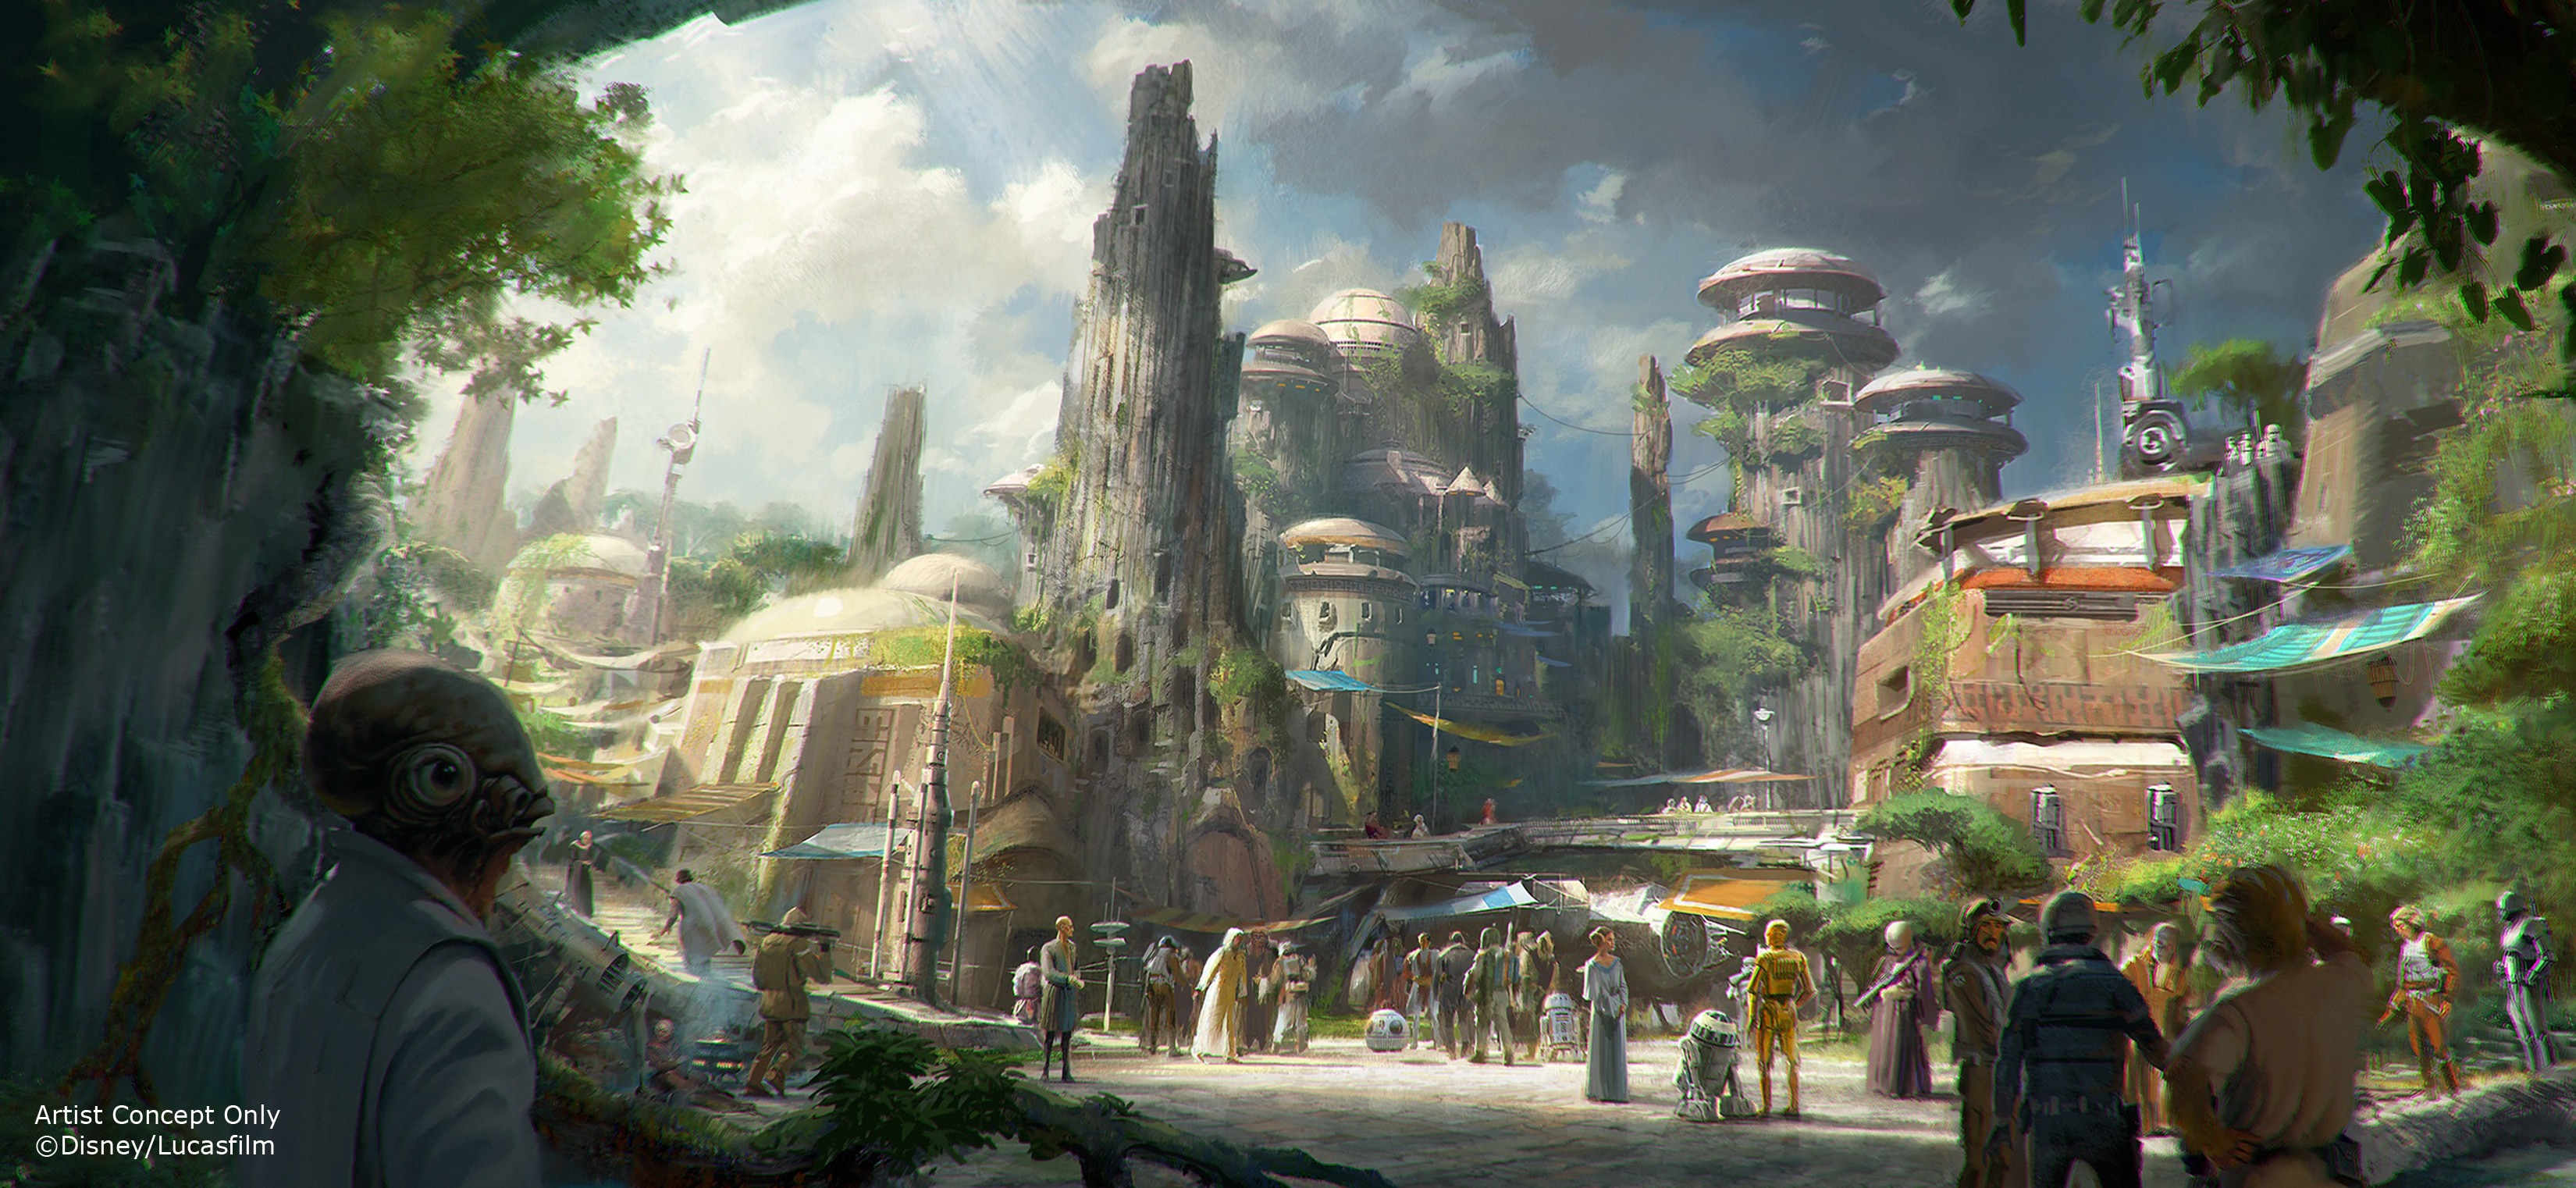 Galaxy's Edge right outside of the Disney star wars hotel